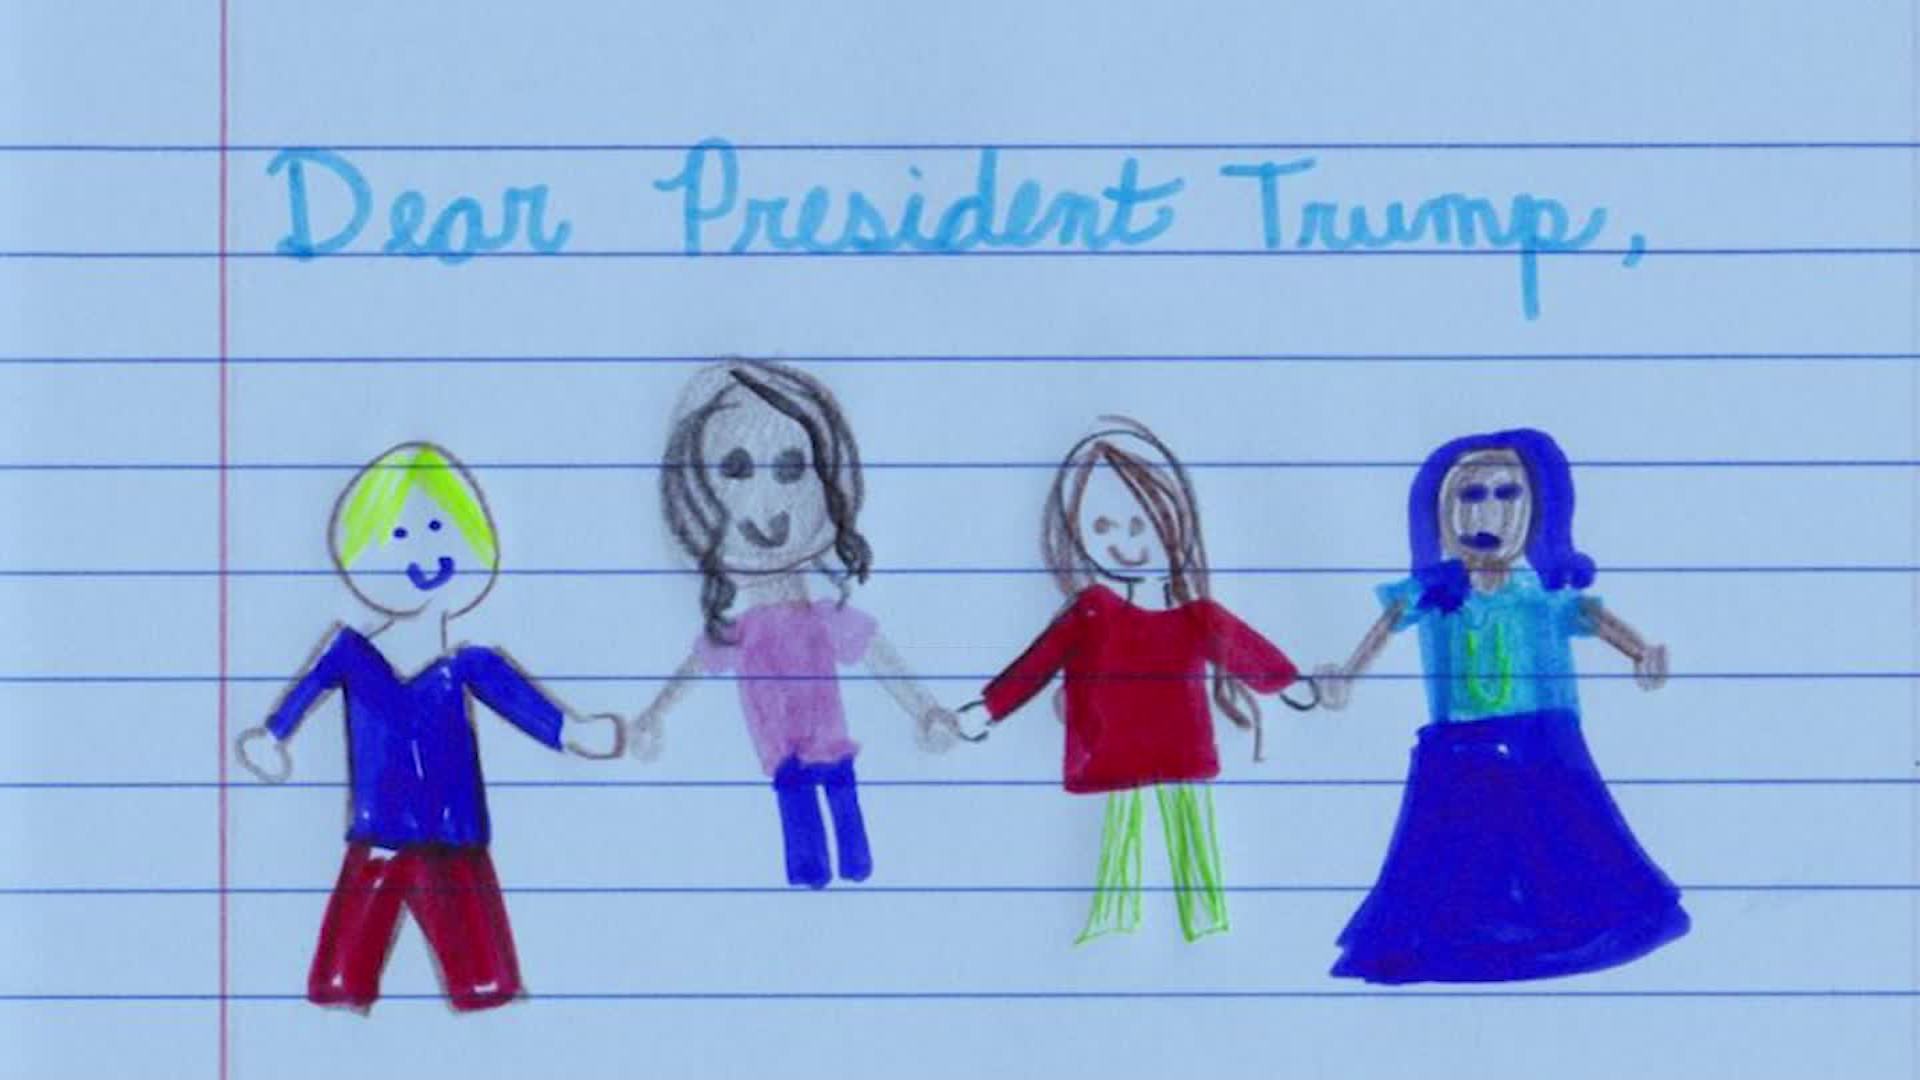 Kids write to Trump asking him to be kind